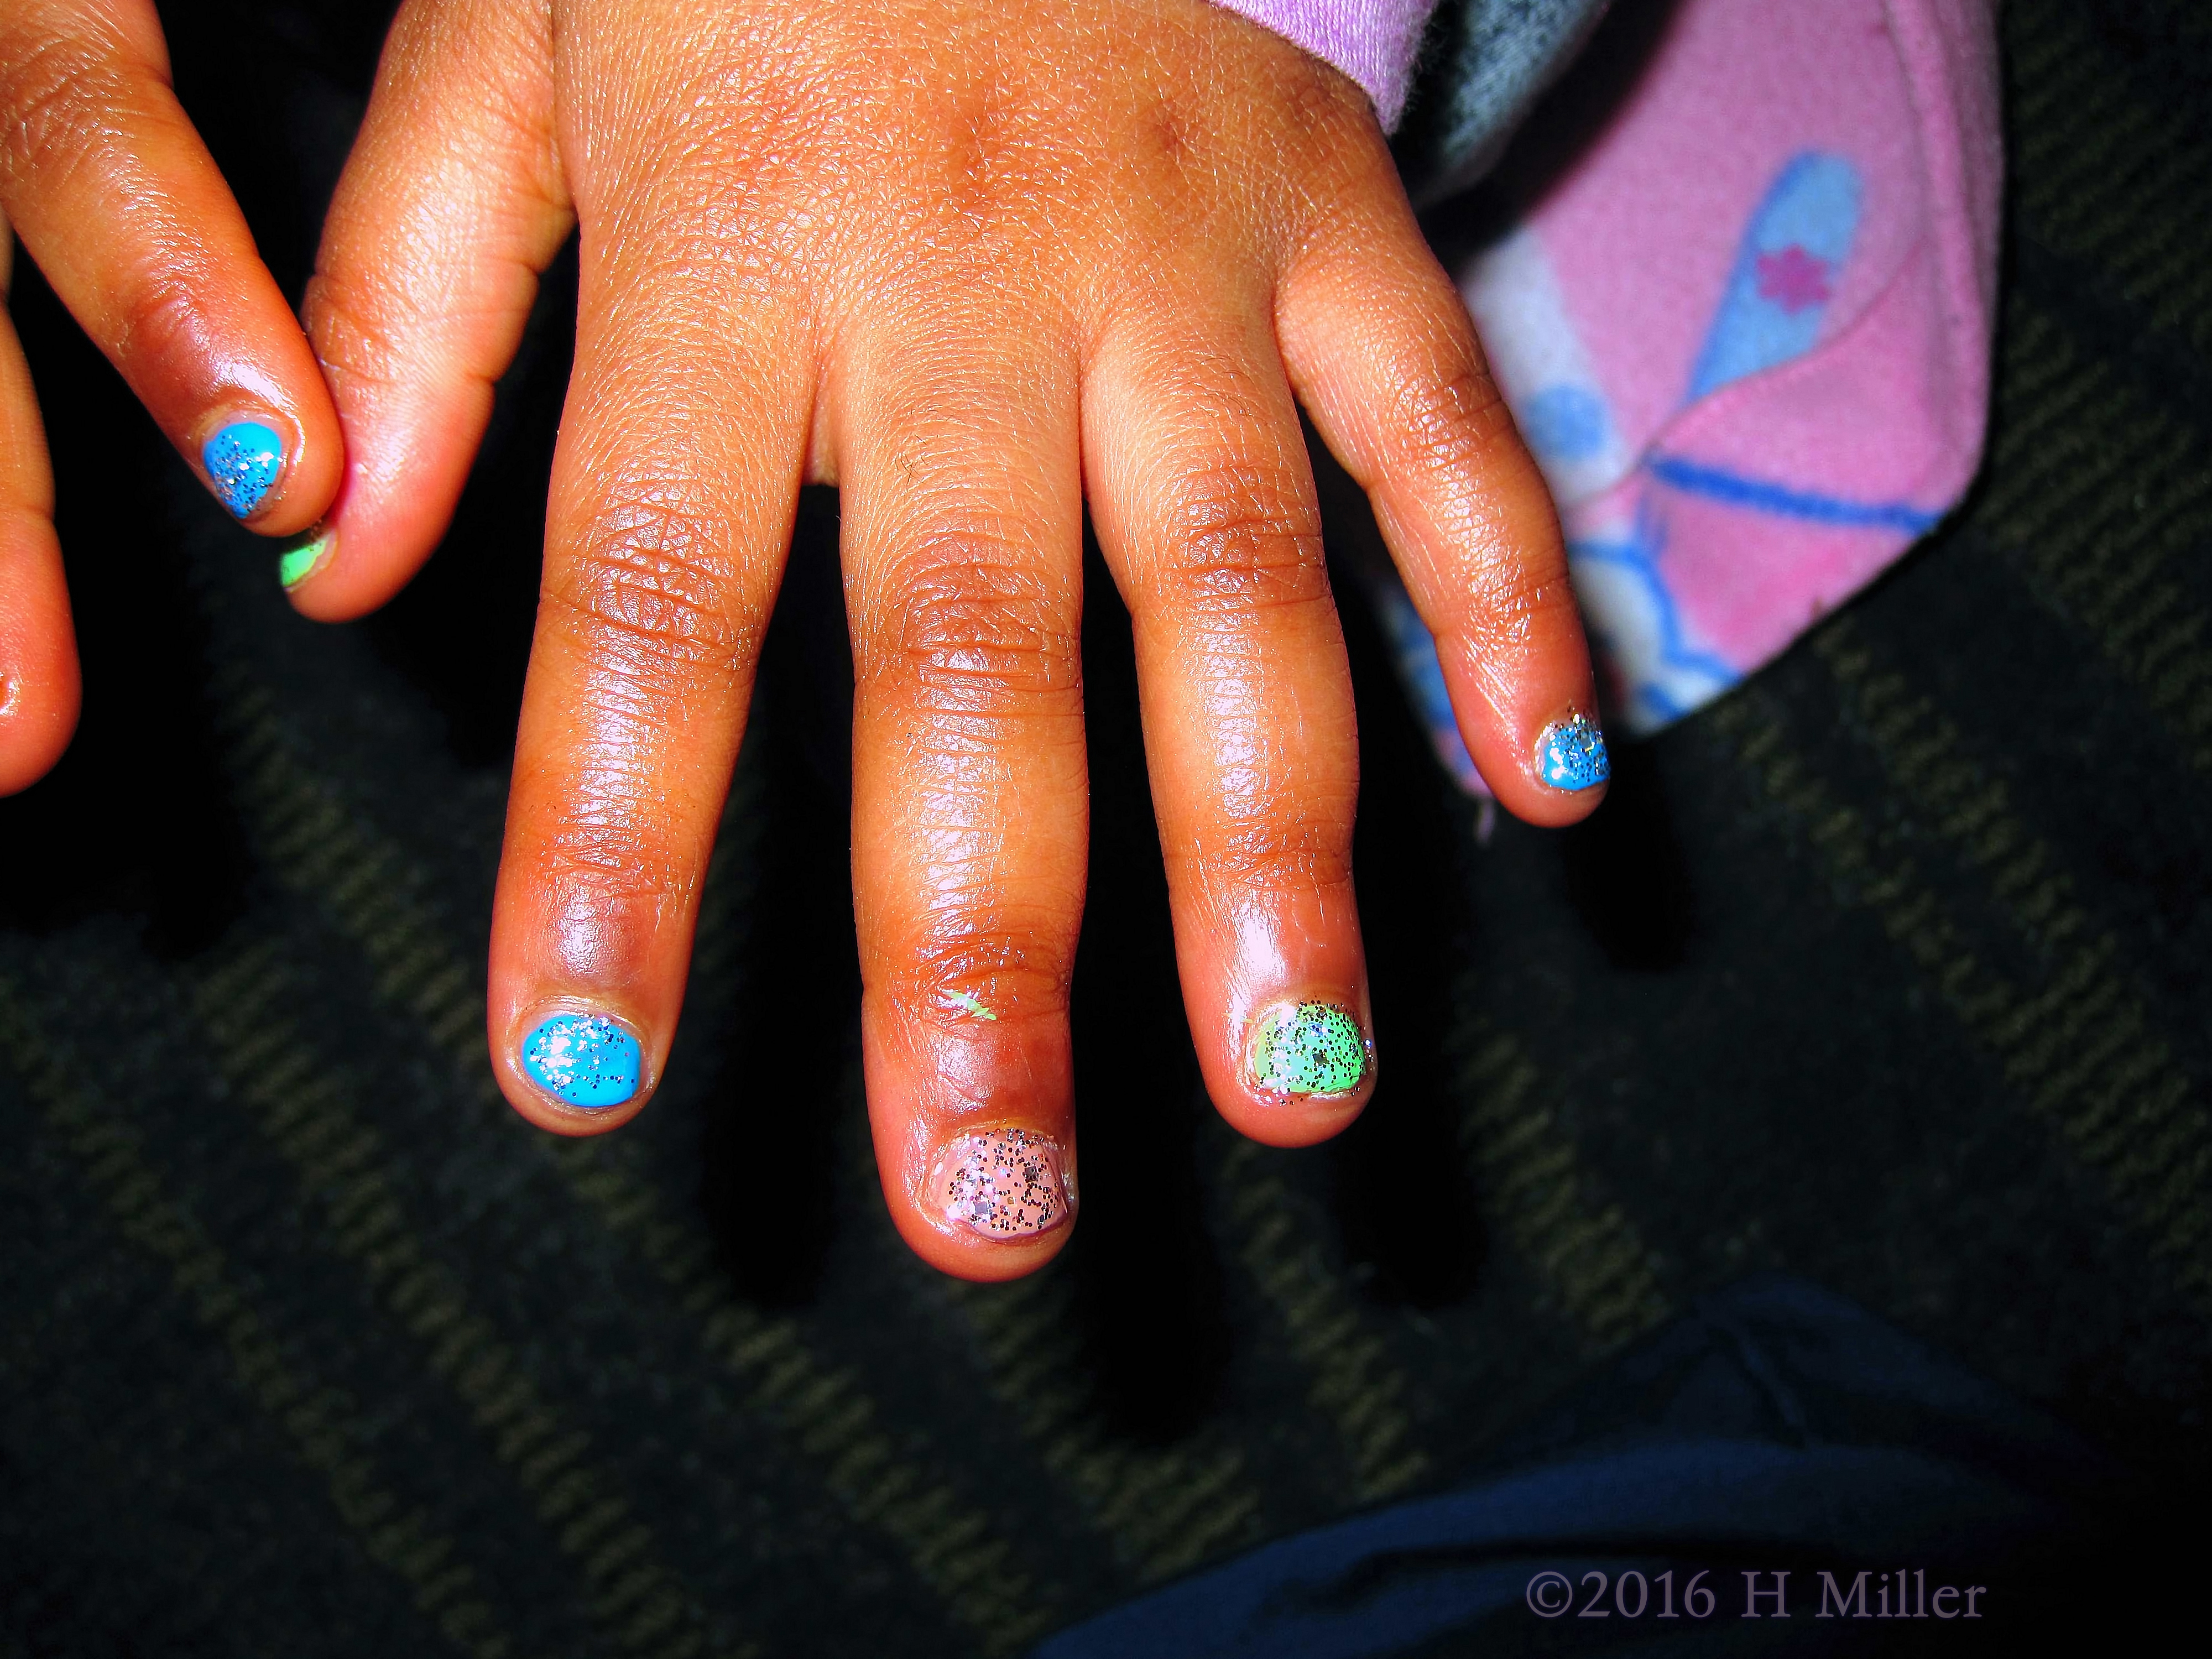 Amazing Glitter Manicure At The Nail Salon With Rainbow Colors! 